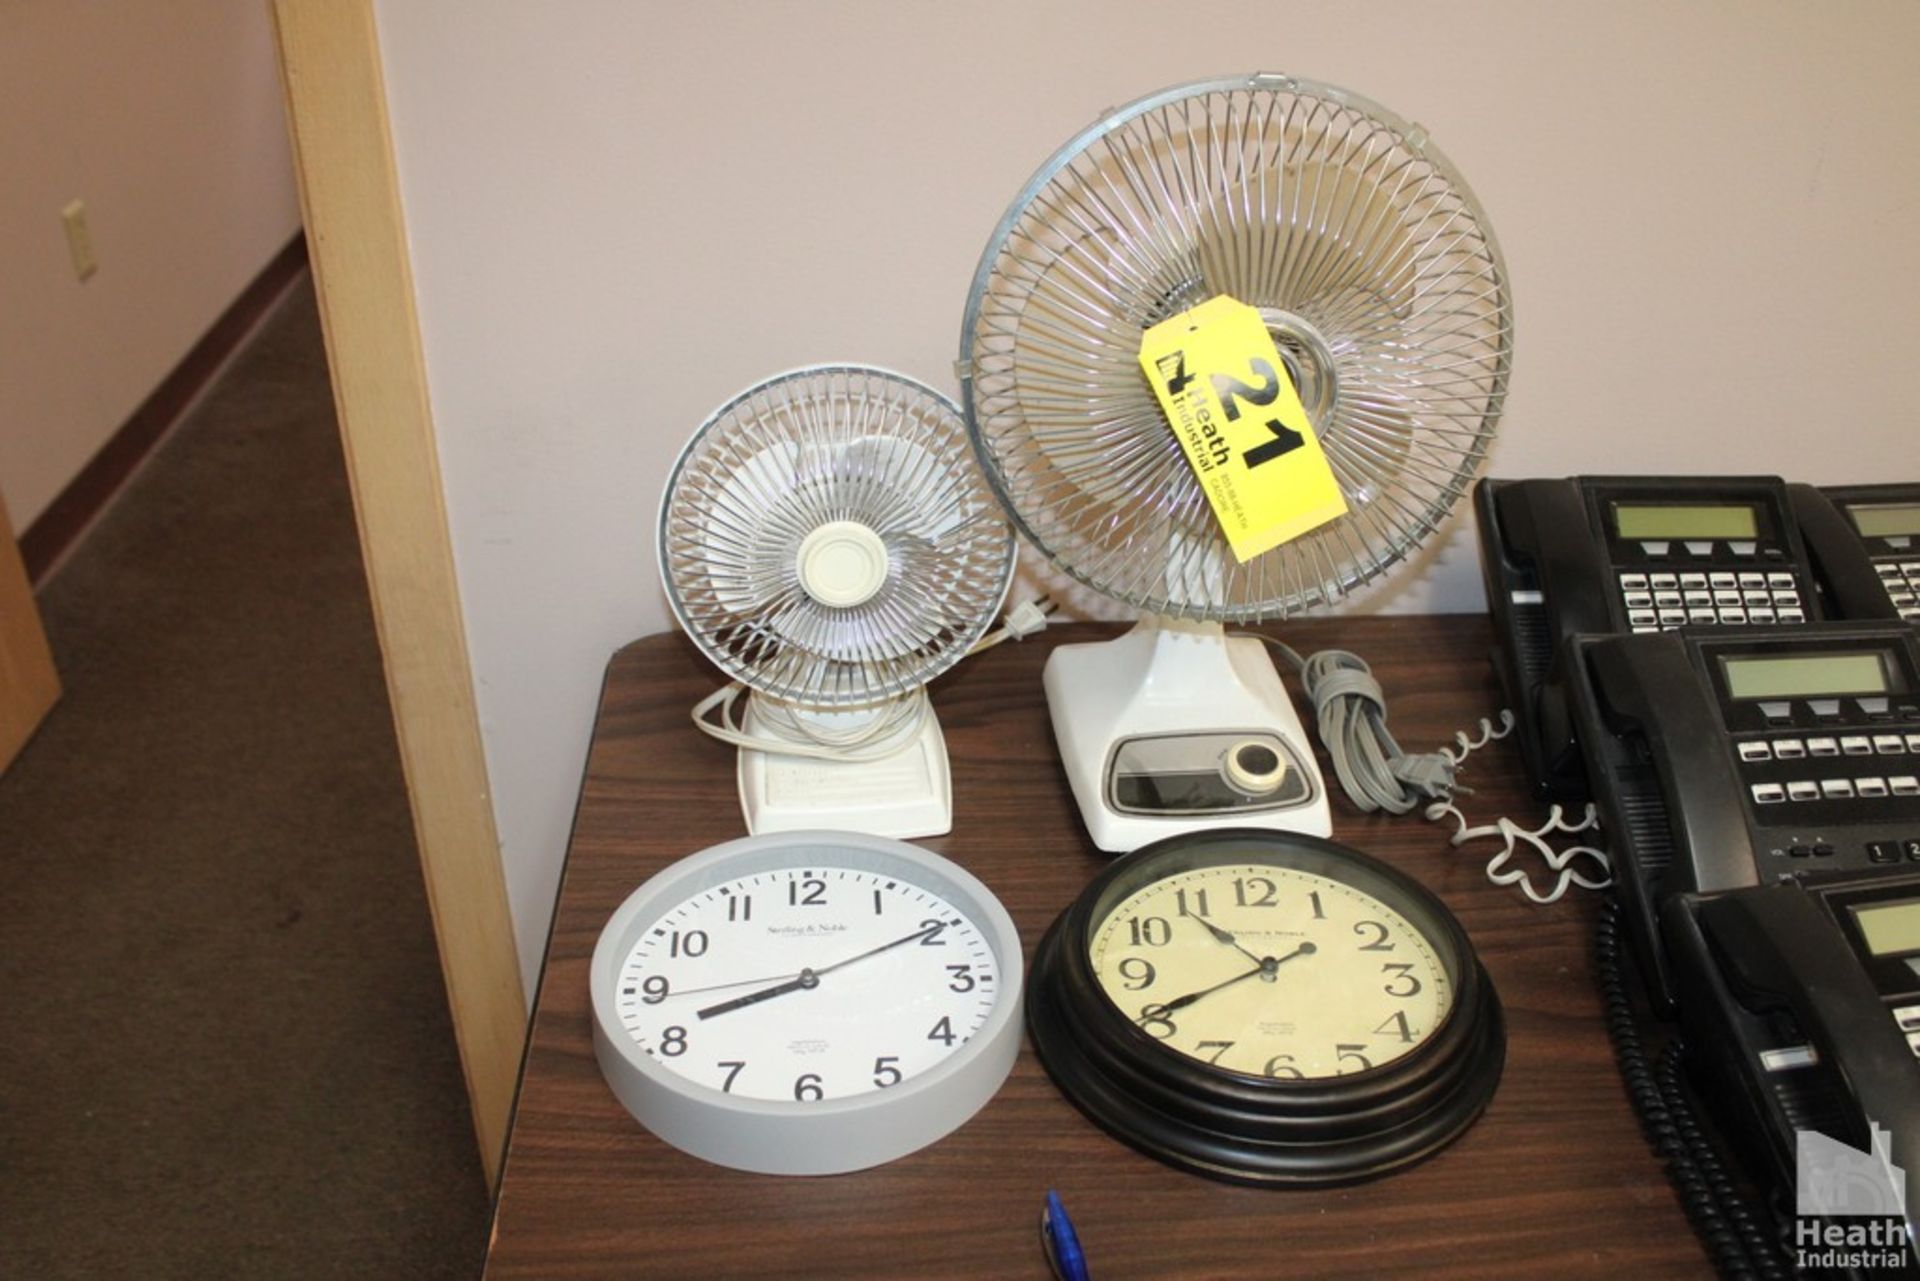 (2) ASSORTED DESK TOP FANS AND TWO WALL CLOCKS